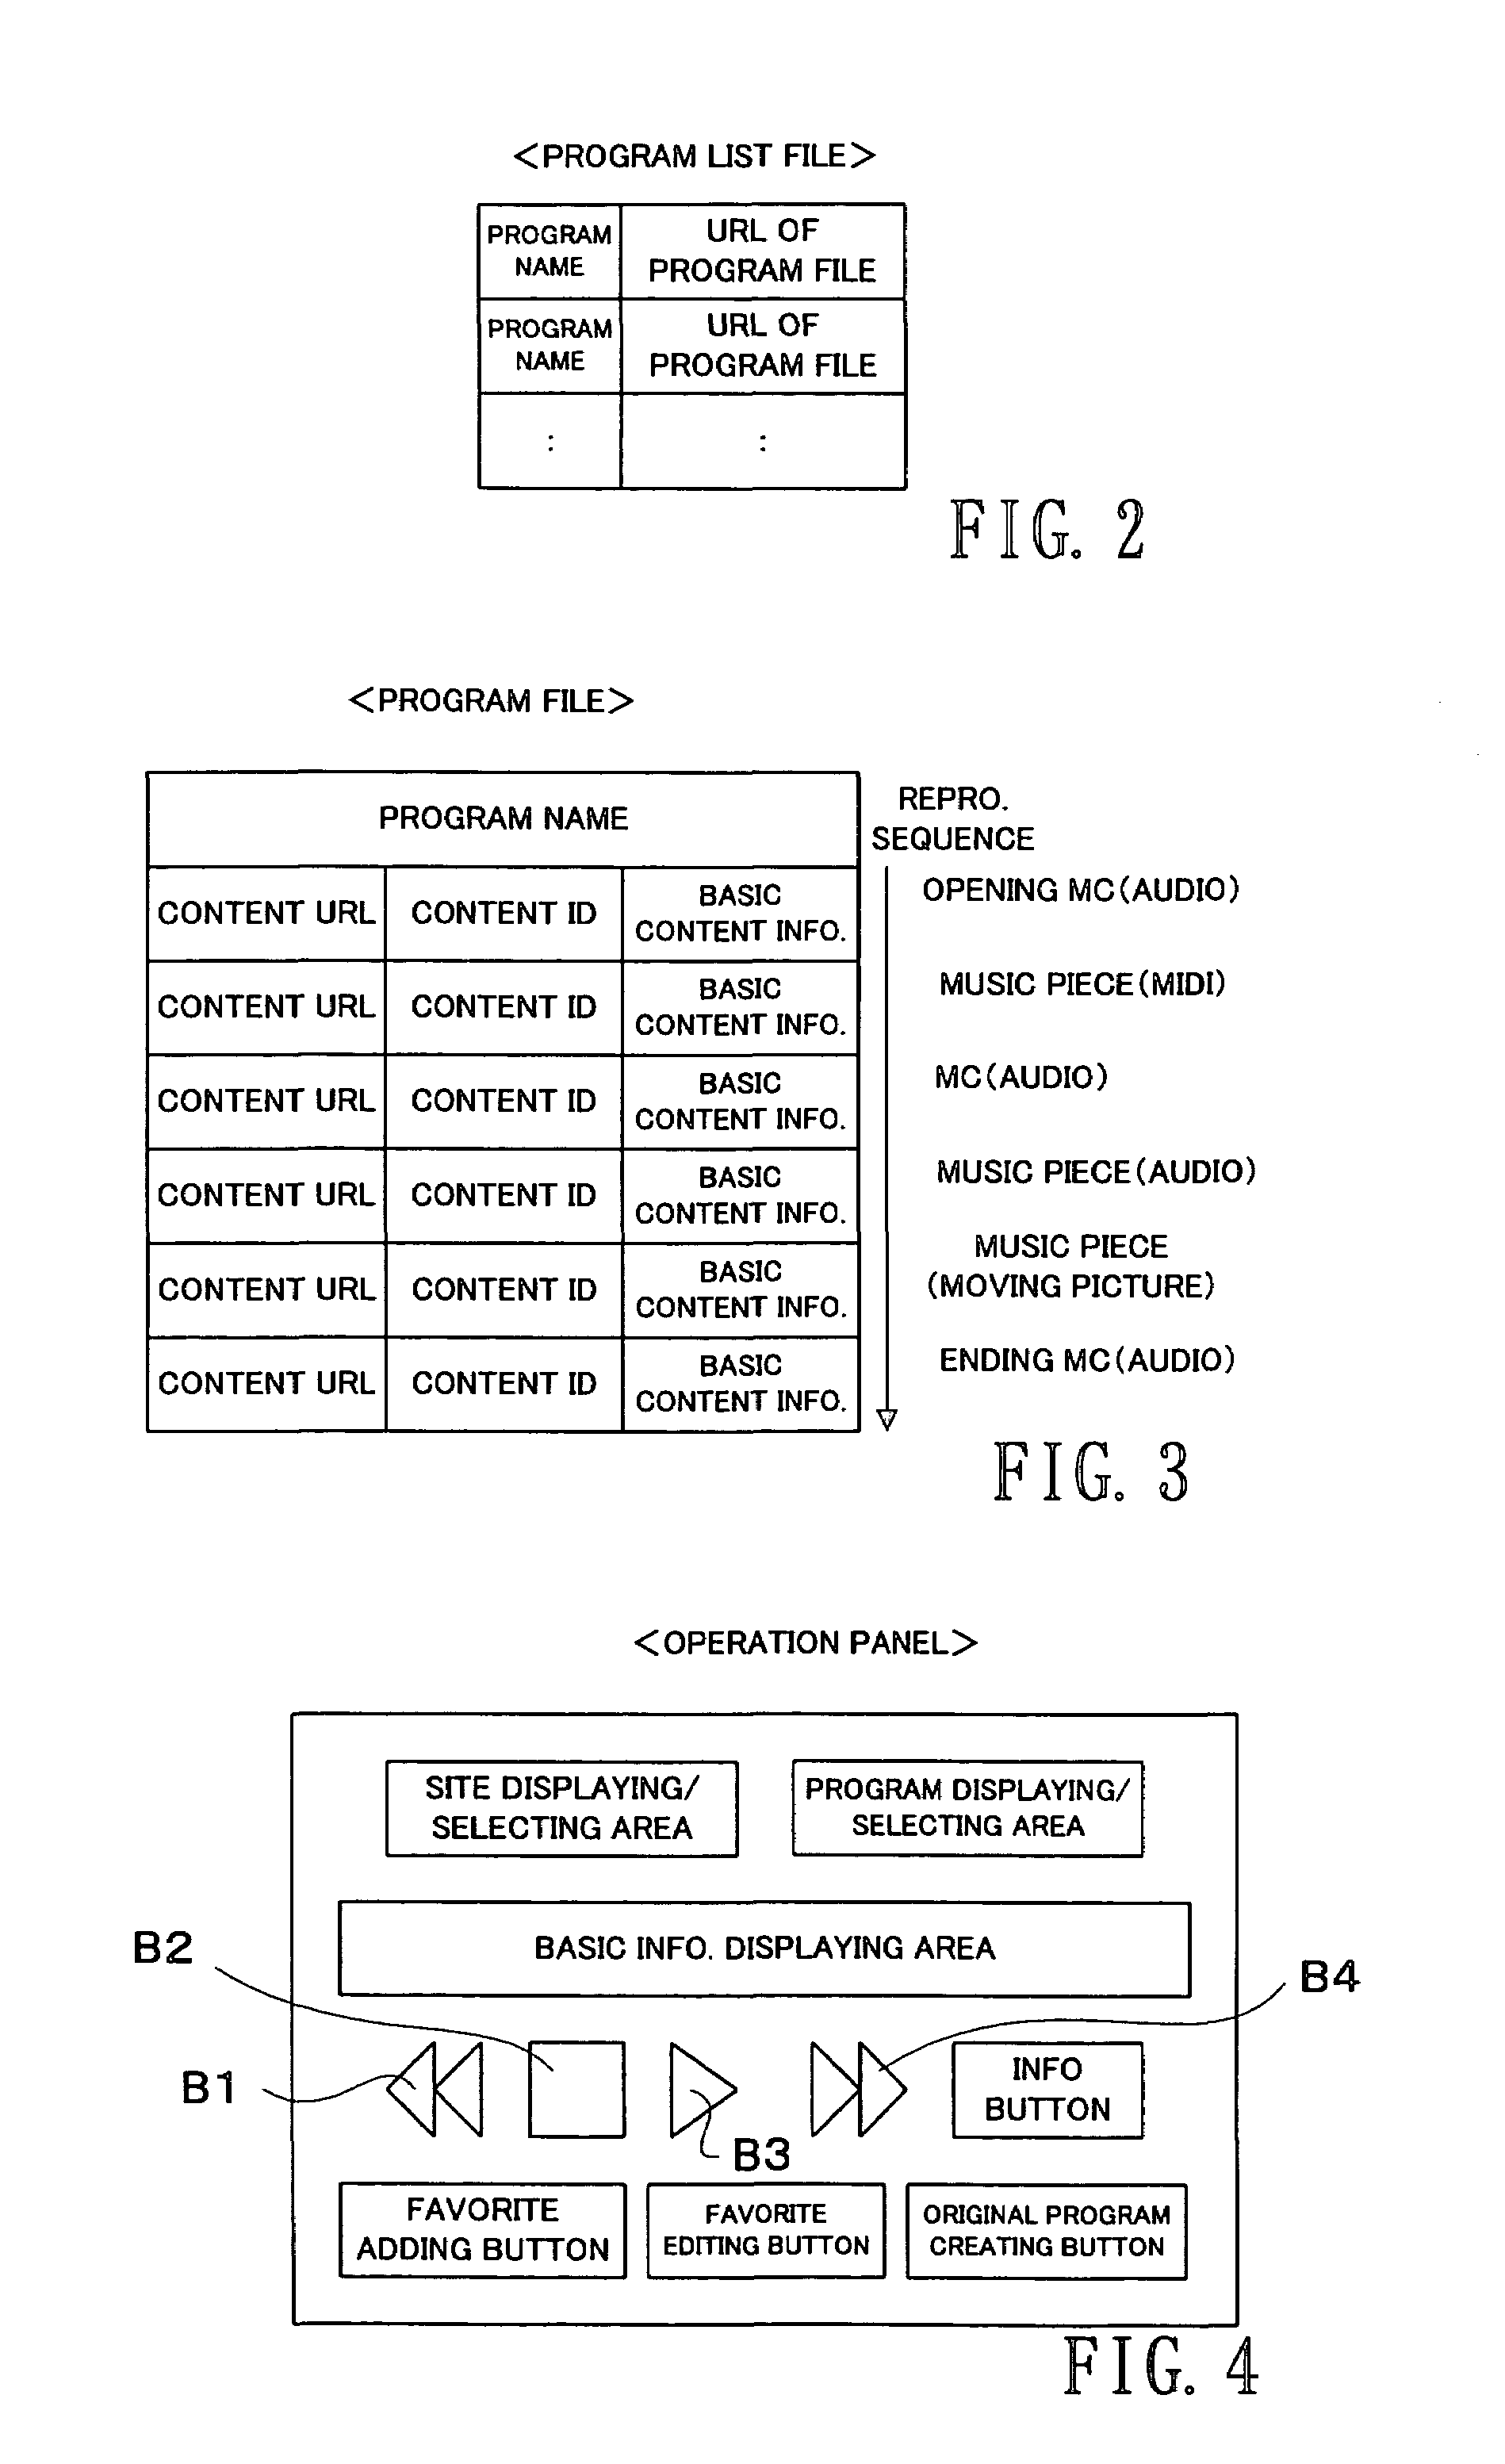 System and method for downloading content files using a communication network and for automatically reproducing the content files in a predefined sequence